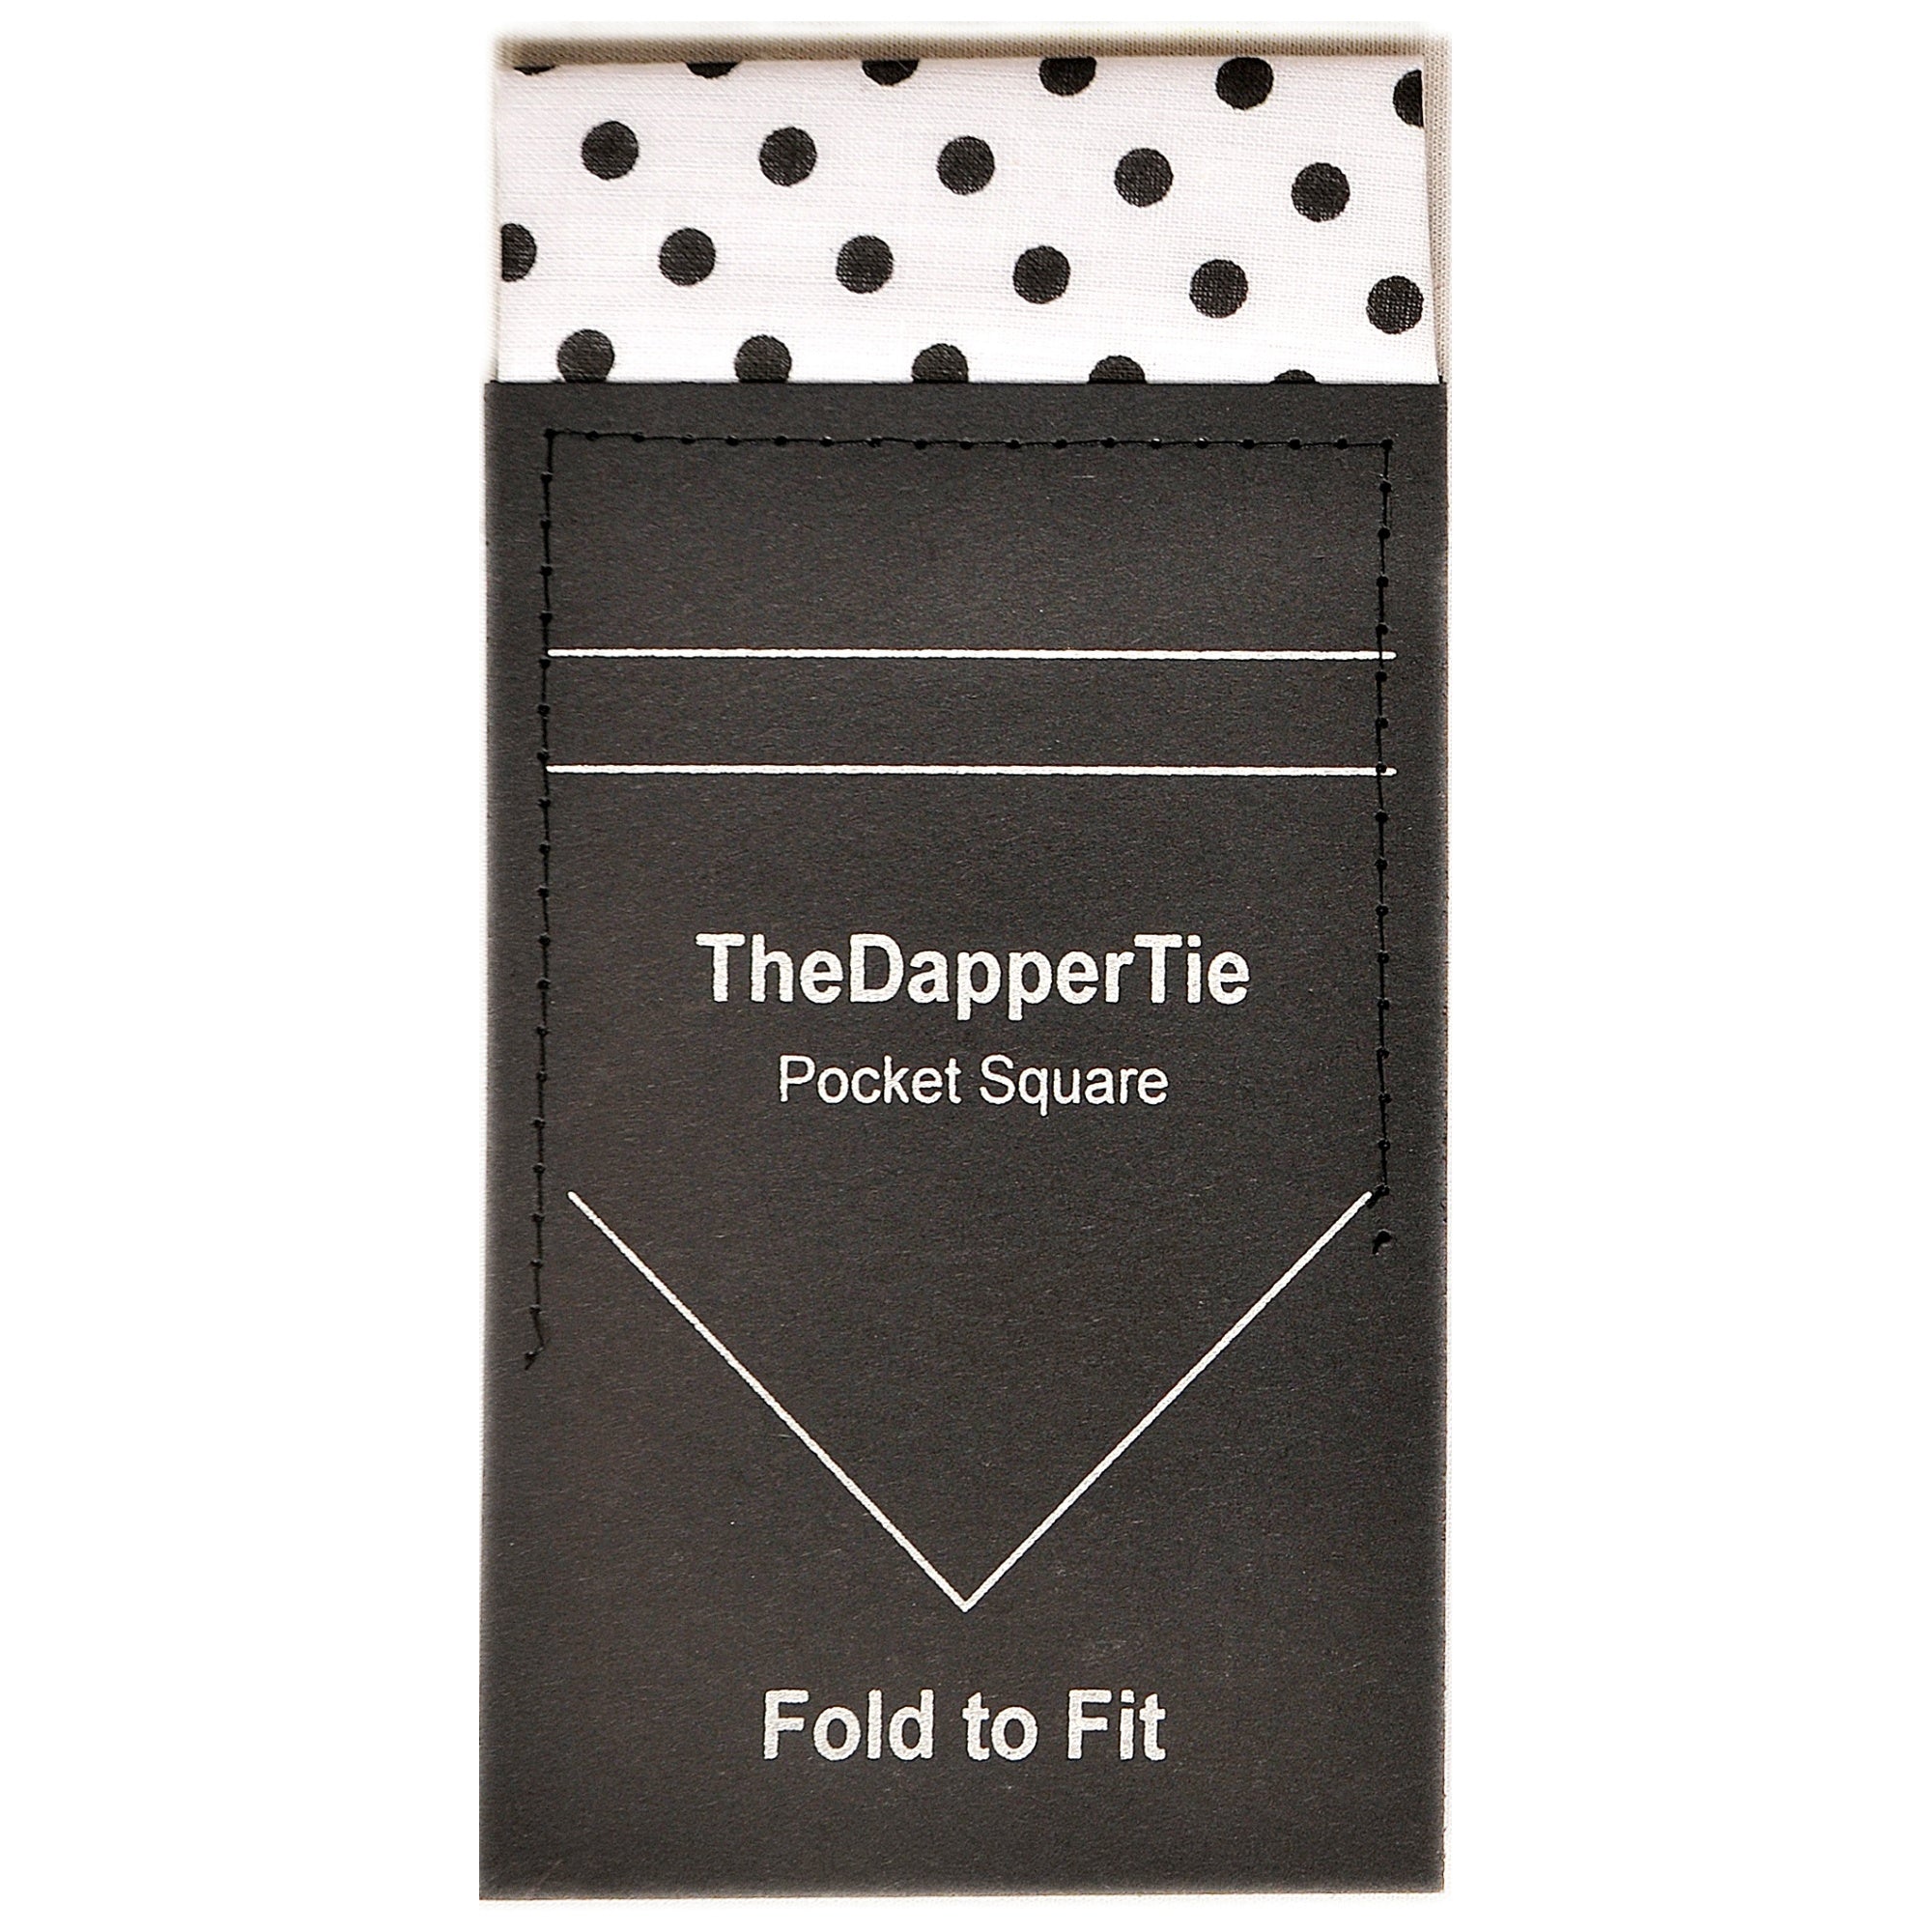 New Men's Polka Dots 100% Cotton Flat Pre Folded Pocket Square on Card - TheDapperTie Prefolded Pocket Squares TheDapperTie White & Black  